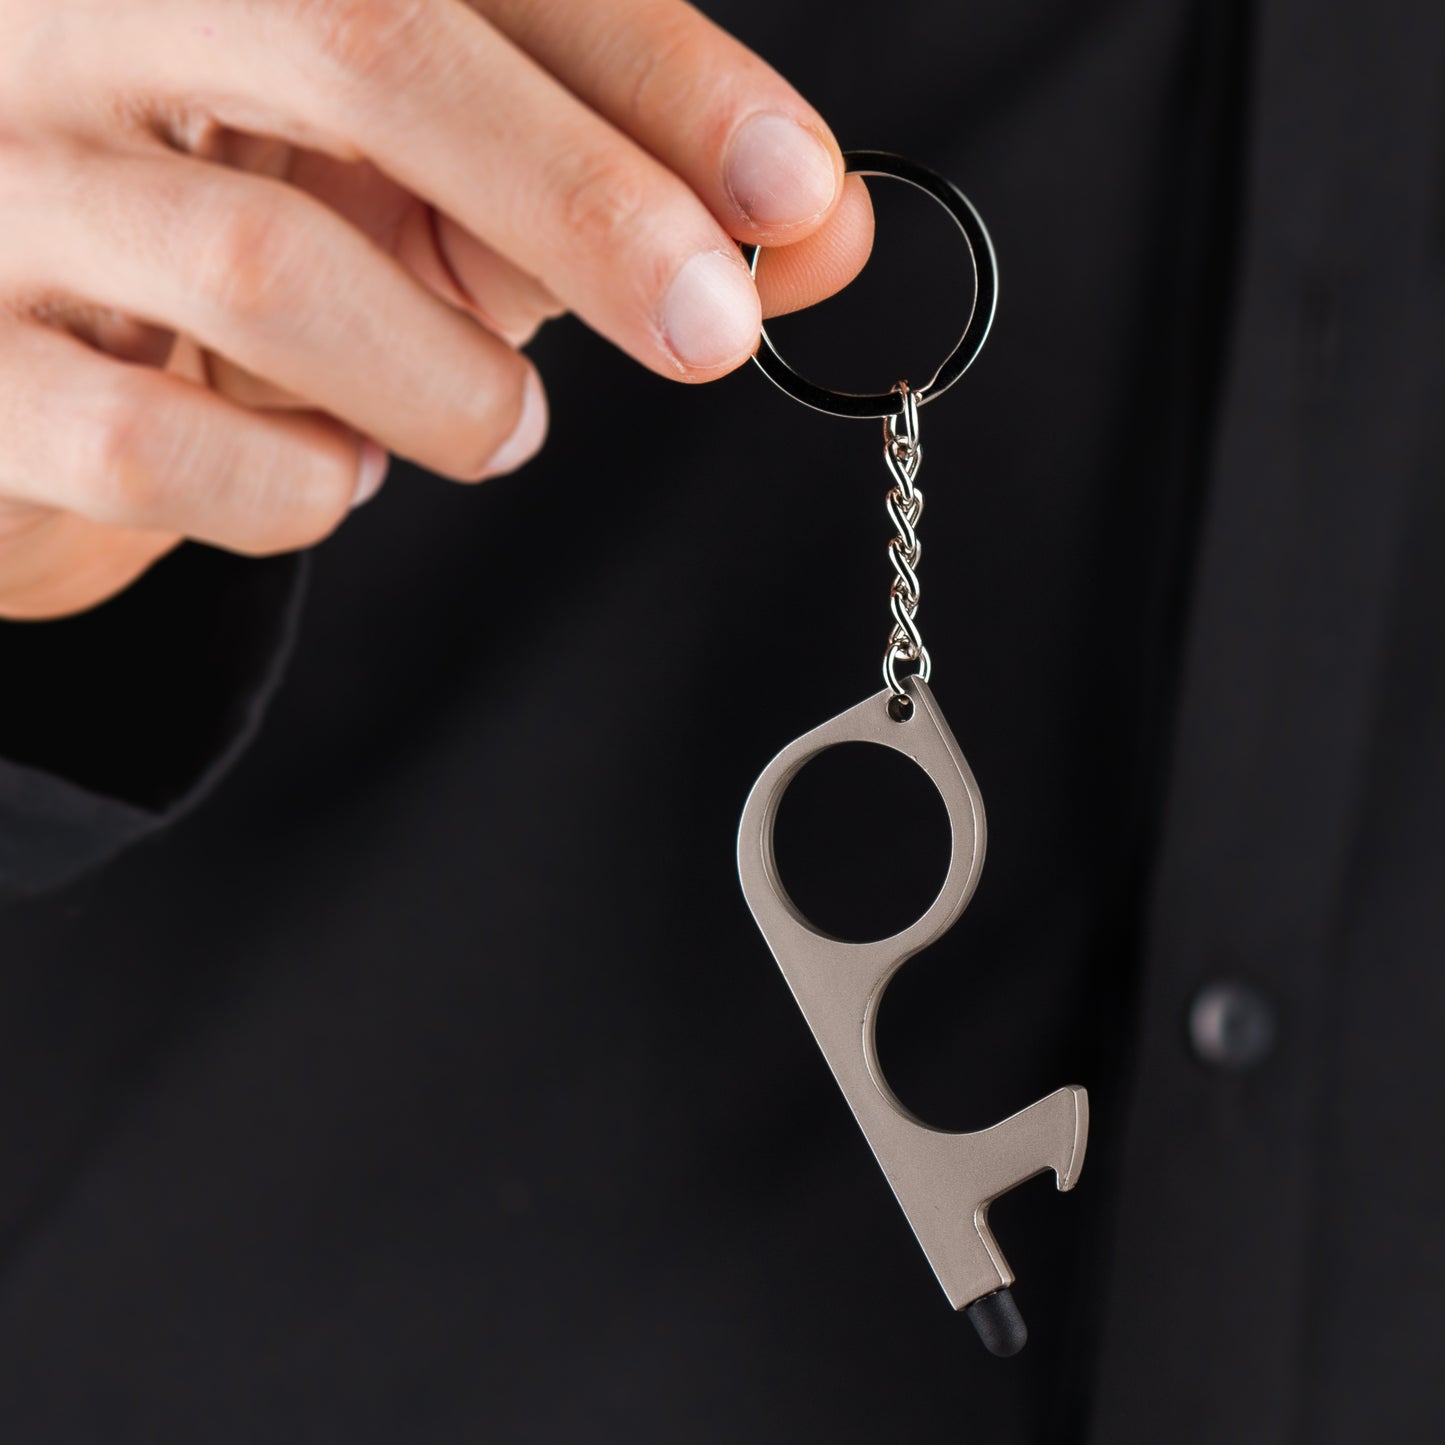 Touch Tool Keychain